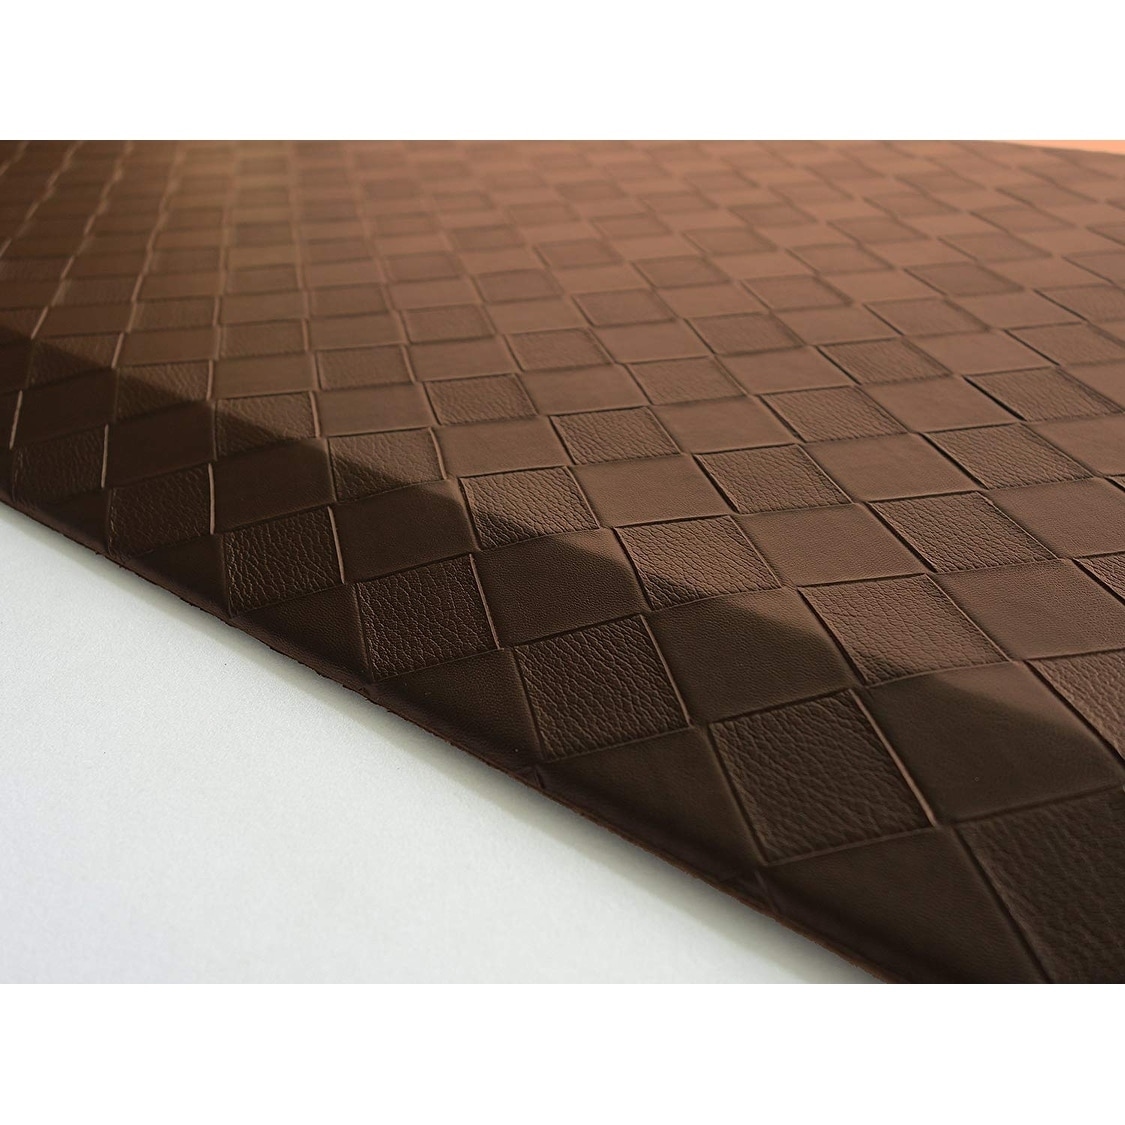 https://ak1.ostkcdn.com/images/products/30522610/Elegant-Comfort-Anti-Fatigue-Standing-Comfort-Kitchen-Mat-OVERSIZED-Non-Slip-Backing-Perfect-for-Kitchen-39-X-20-771458ae-1601-4bba-b7c4-4164f6e1625f.jpg